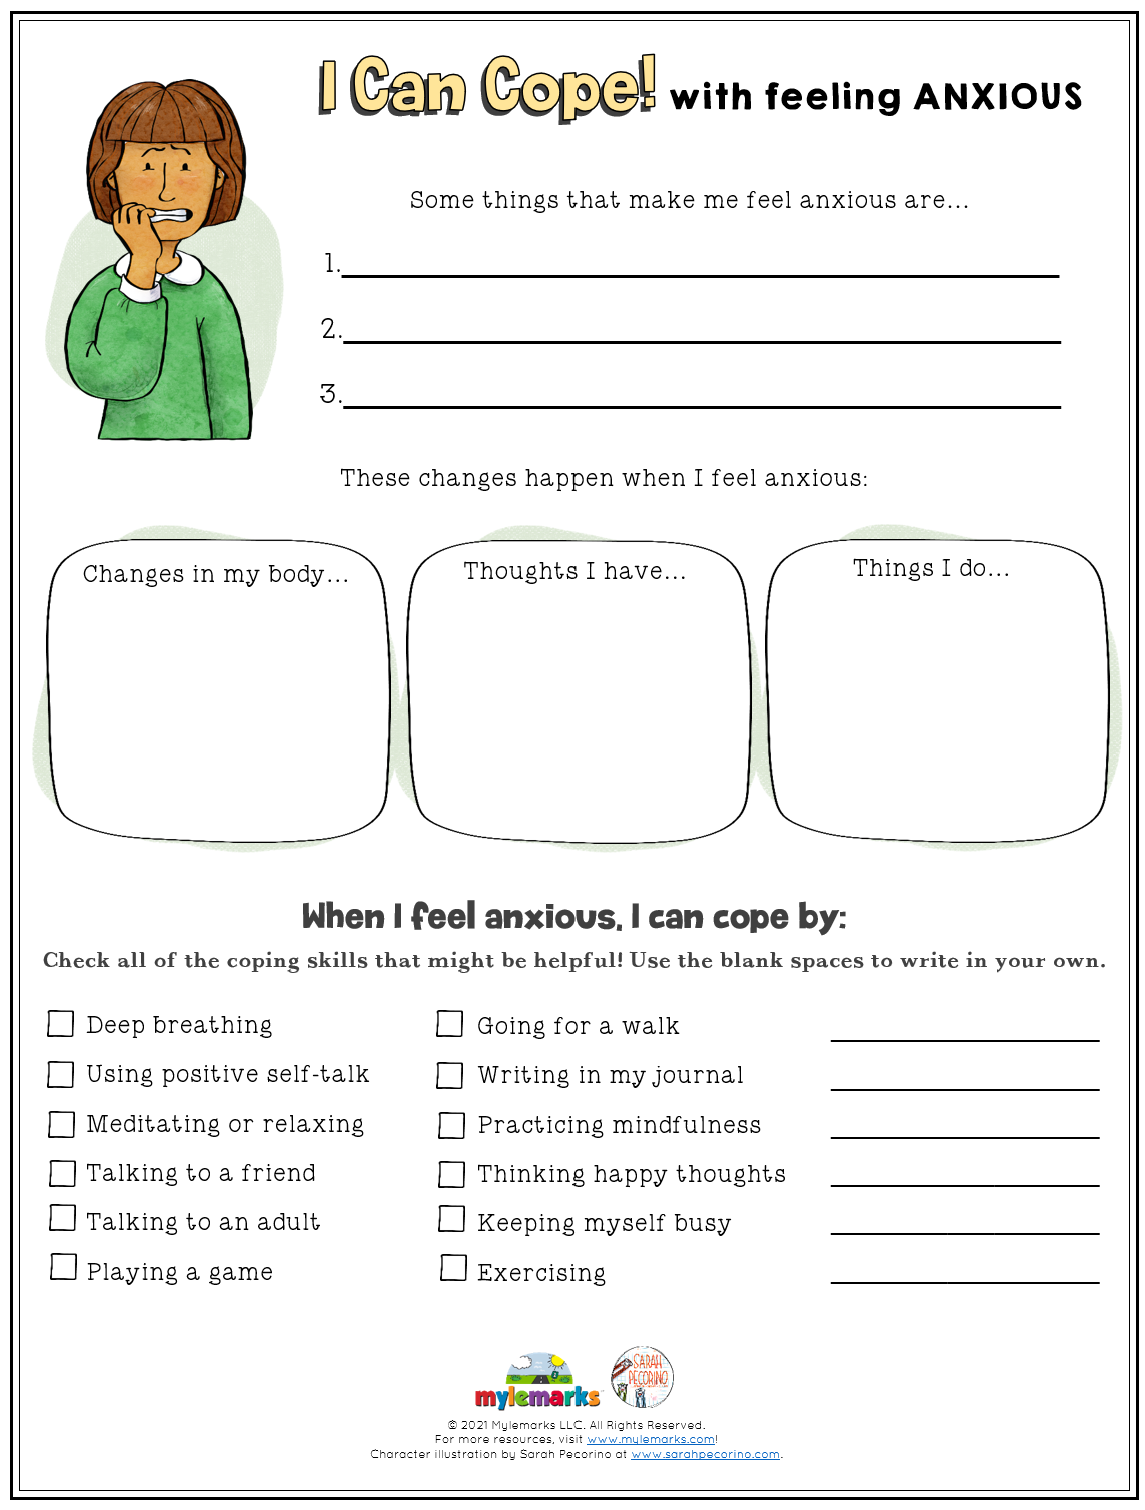 coping-skills-for-anxiety-worksheets-printable-form-templates-and-letter